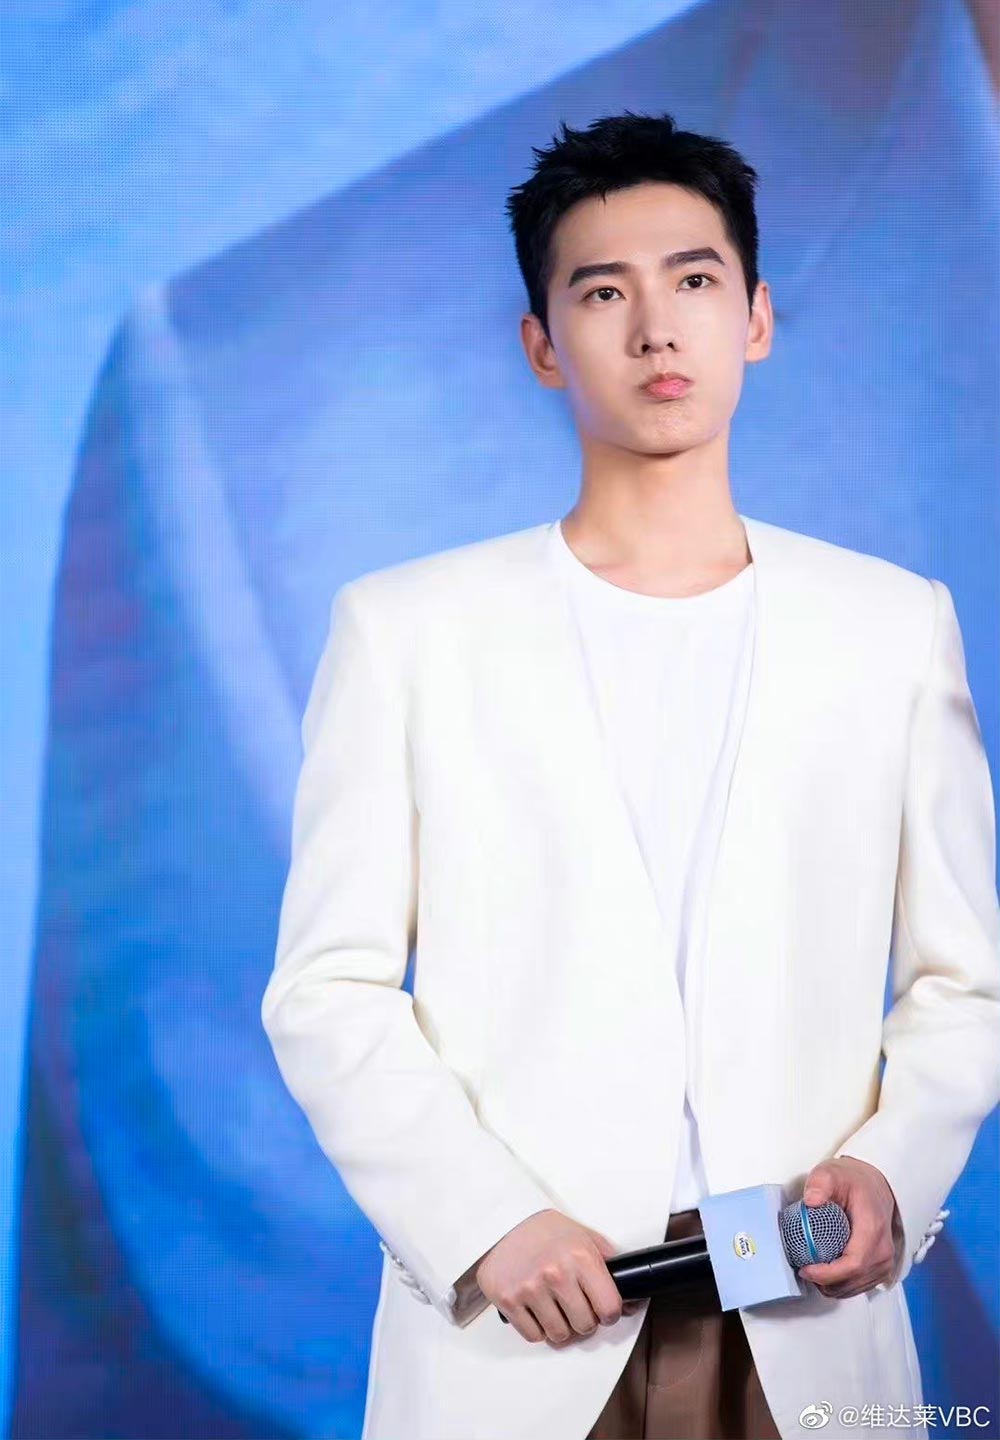 Actor YangYang on a TV show in a VBC suit designed by EnQi Li, BoZheng Chen and XinYu Zhang